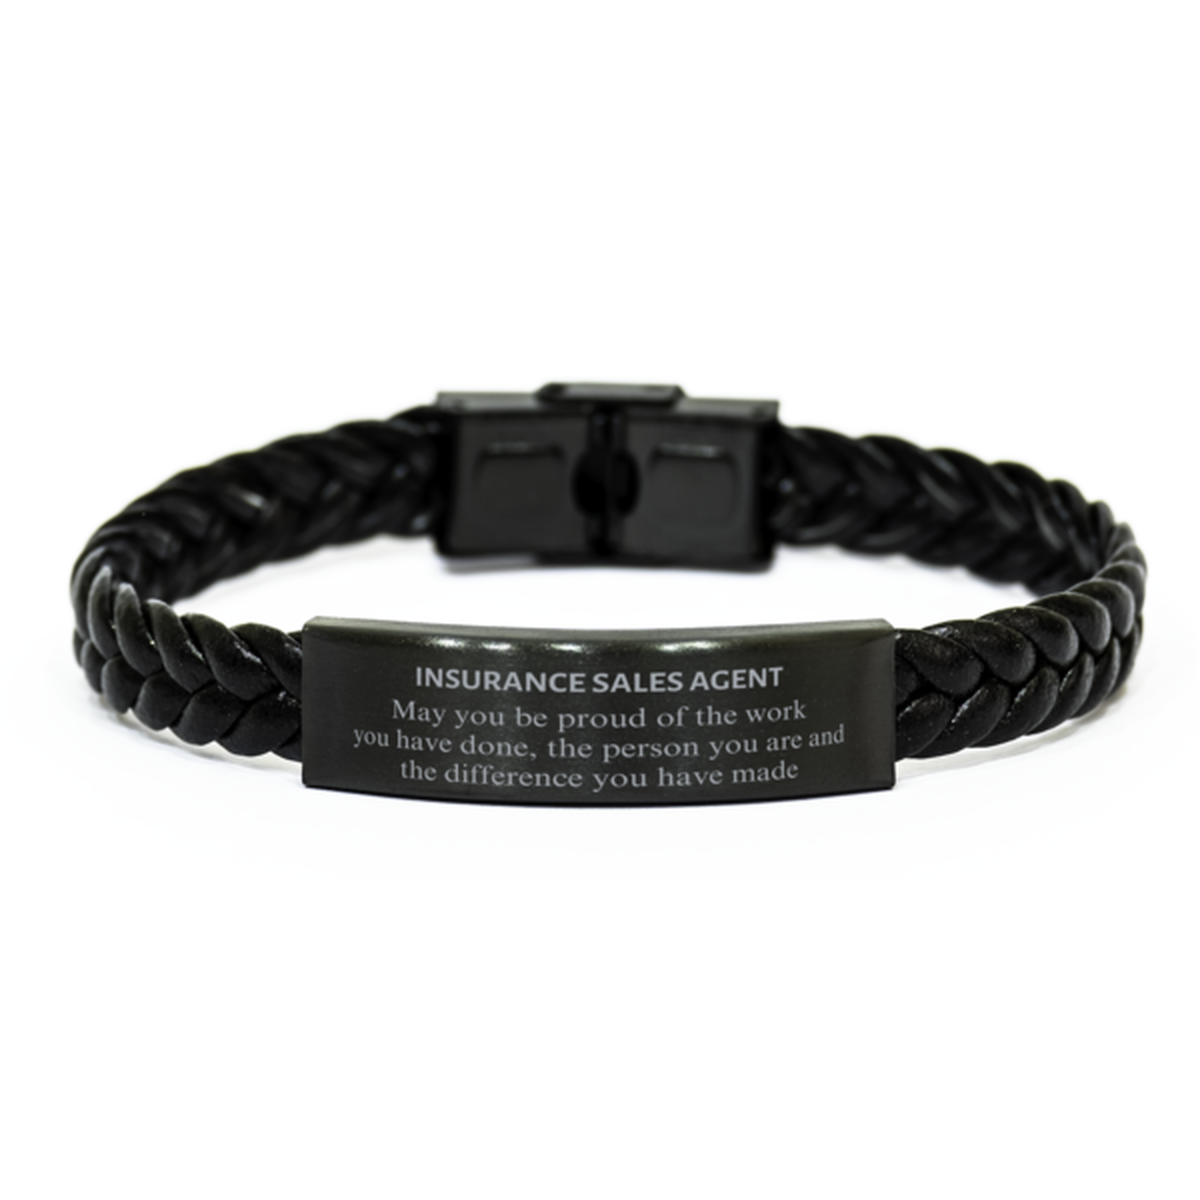 Insurance Sales Agent May you be proud of the work you have done, Retirement Insurance Sales Agent Braided Leather Bracelet for Colleague Appreciation Gifts Amazing for Insurance Sales Agent